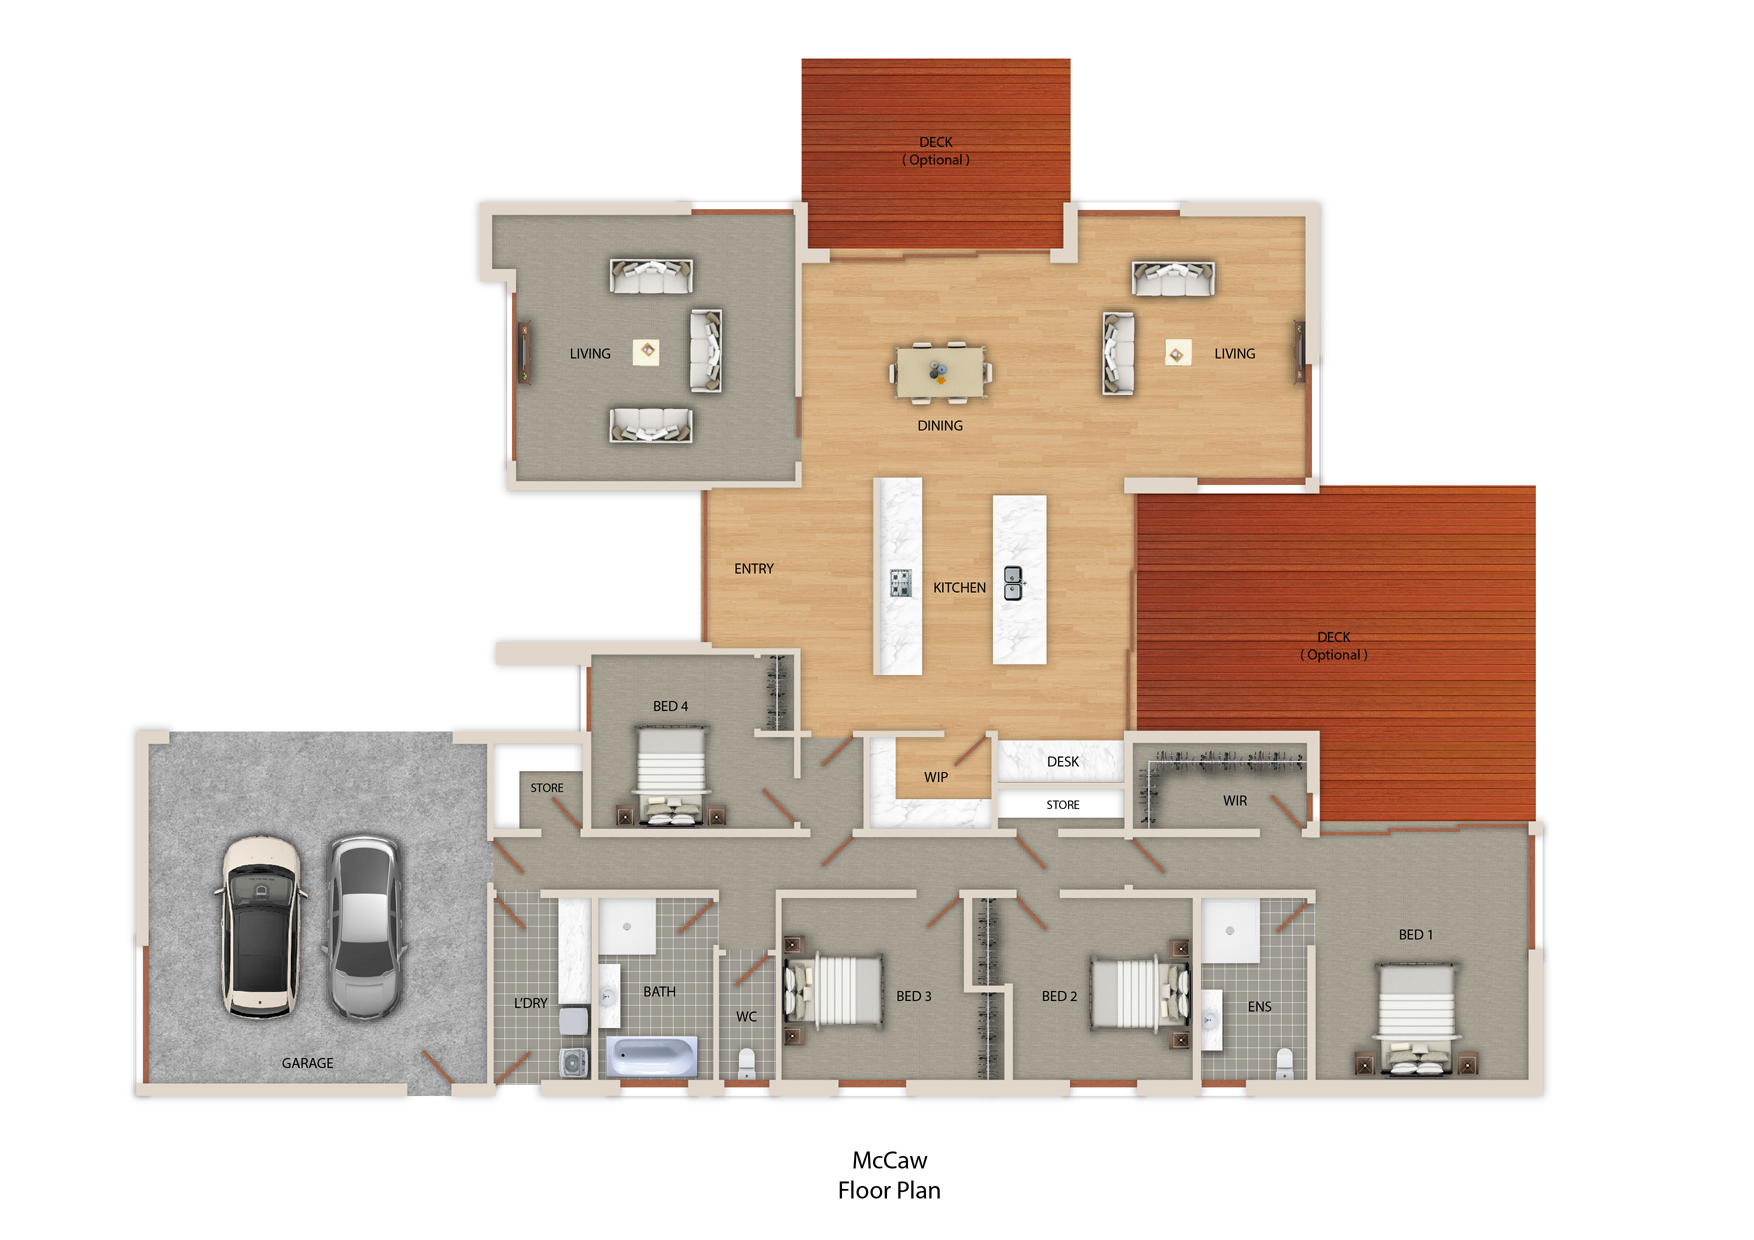 Comfort with open plan living, 4 bedrooms, master suite with ensuite, separate amenities, two distinct roof styles with the Macaw house floorplan.